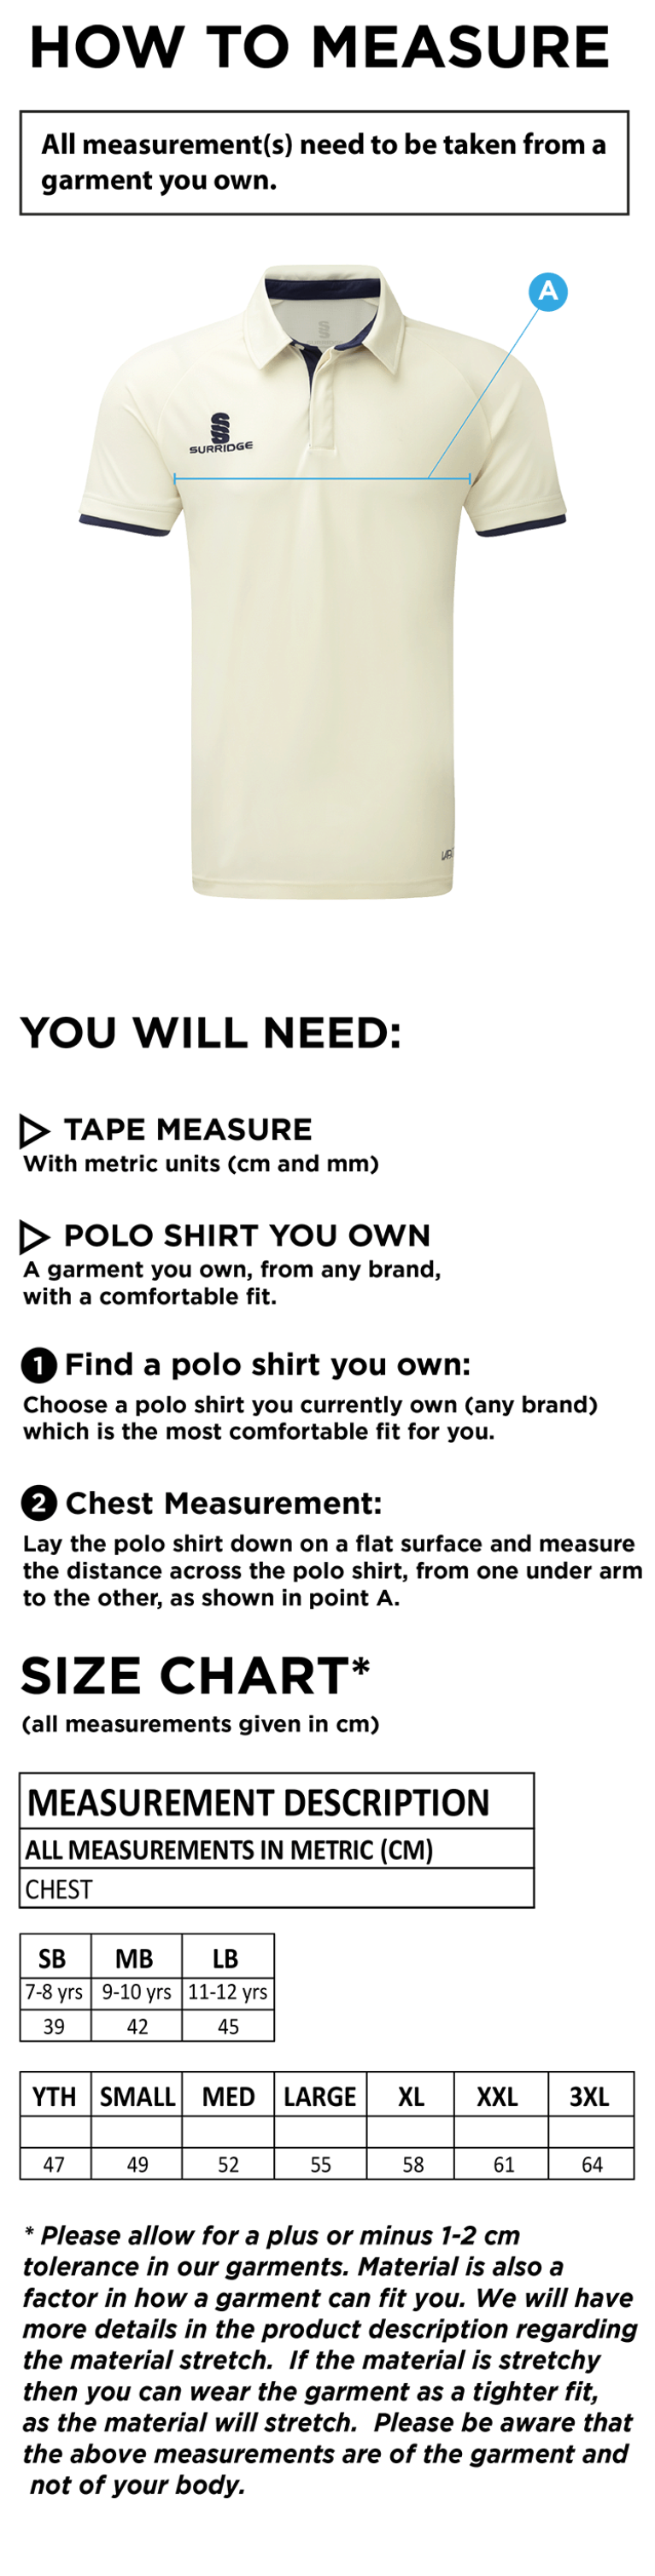 Chirpy's Chiefs - Short Sleeve Shirt - Size Guide